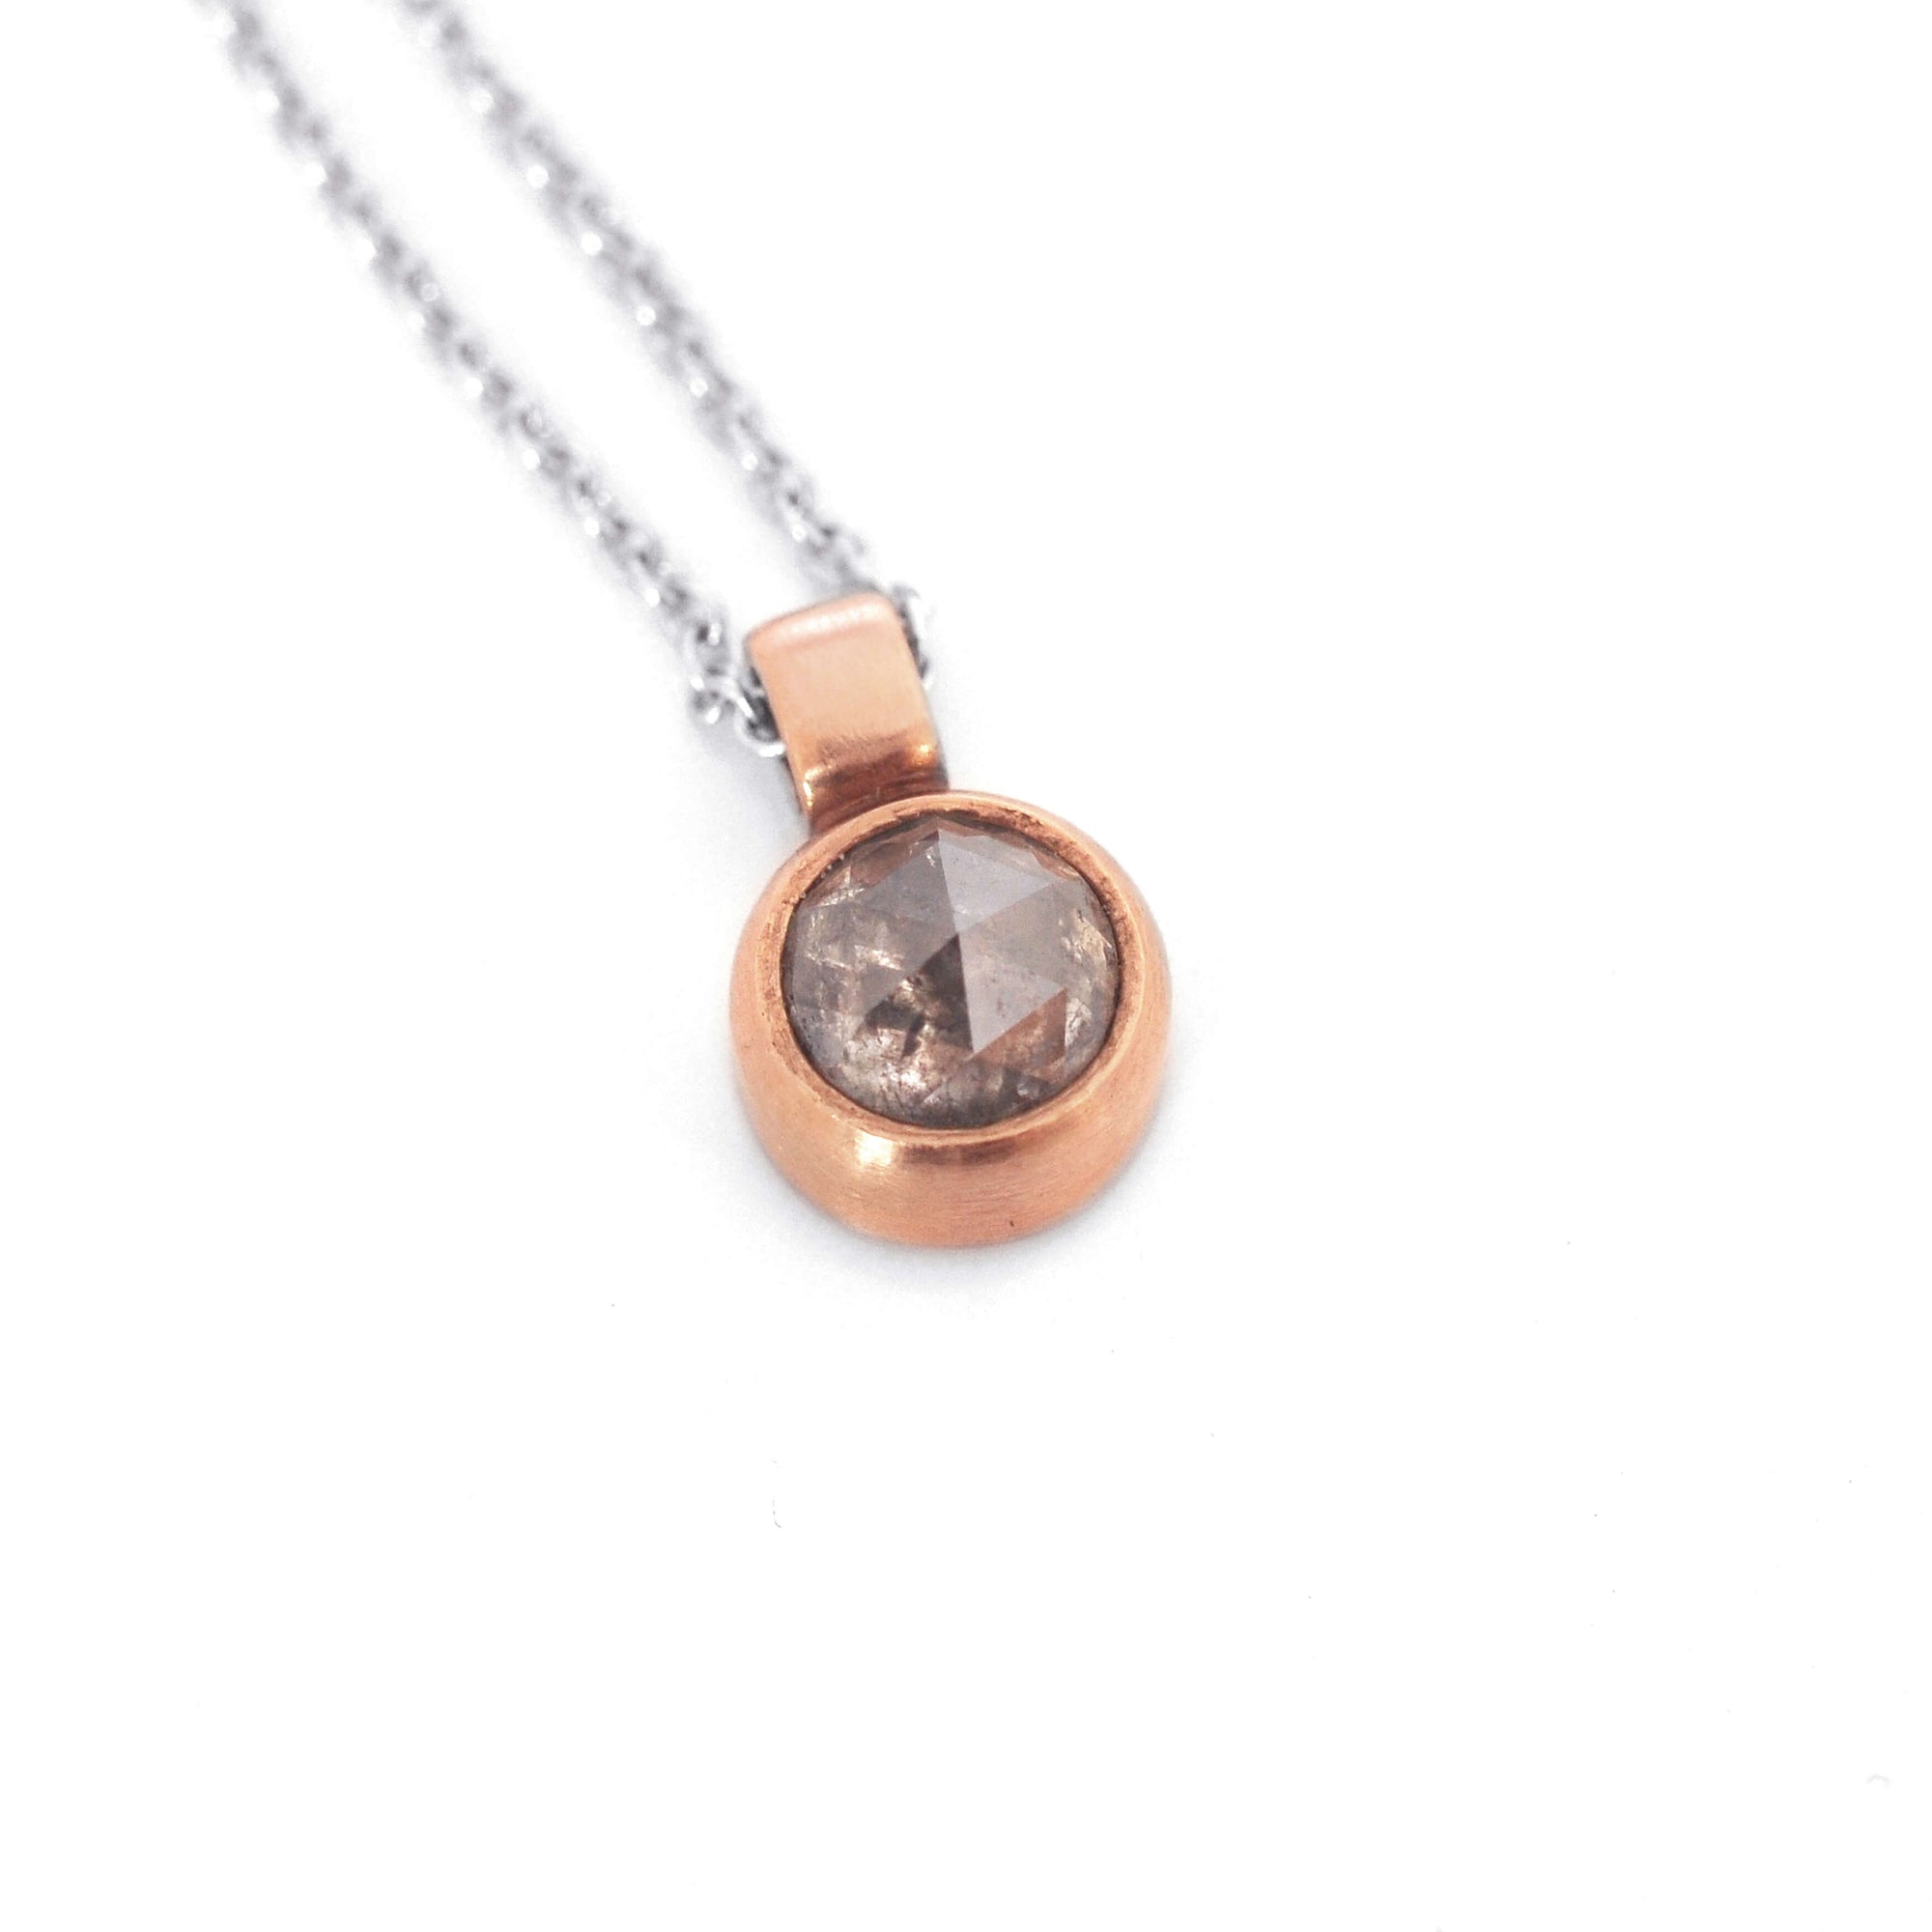 Salt and pepper diamond pendant in rose gold. Handmade by EC Design Jewelry in Minneapolis, MN using recycled metal and conflict-free stone.